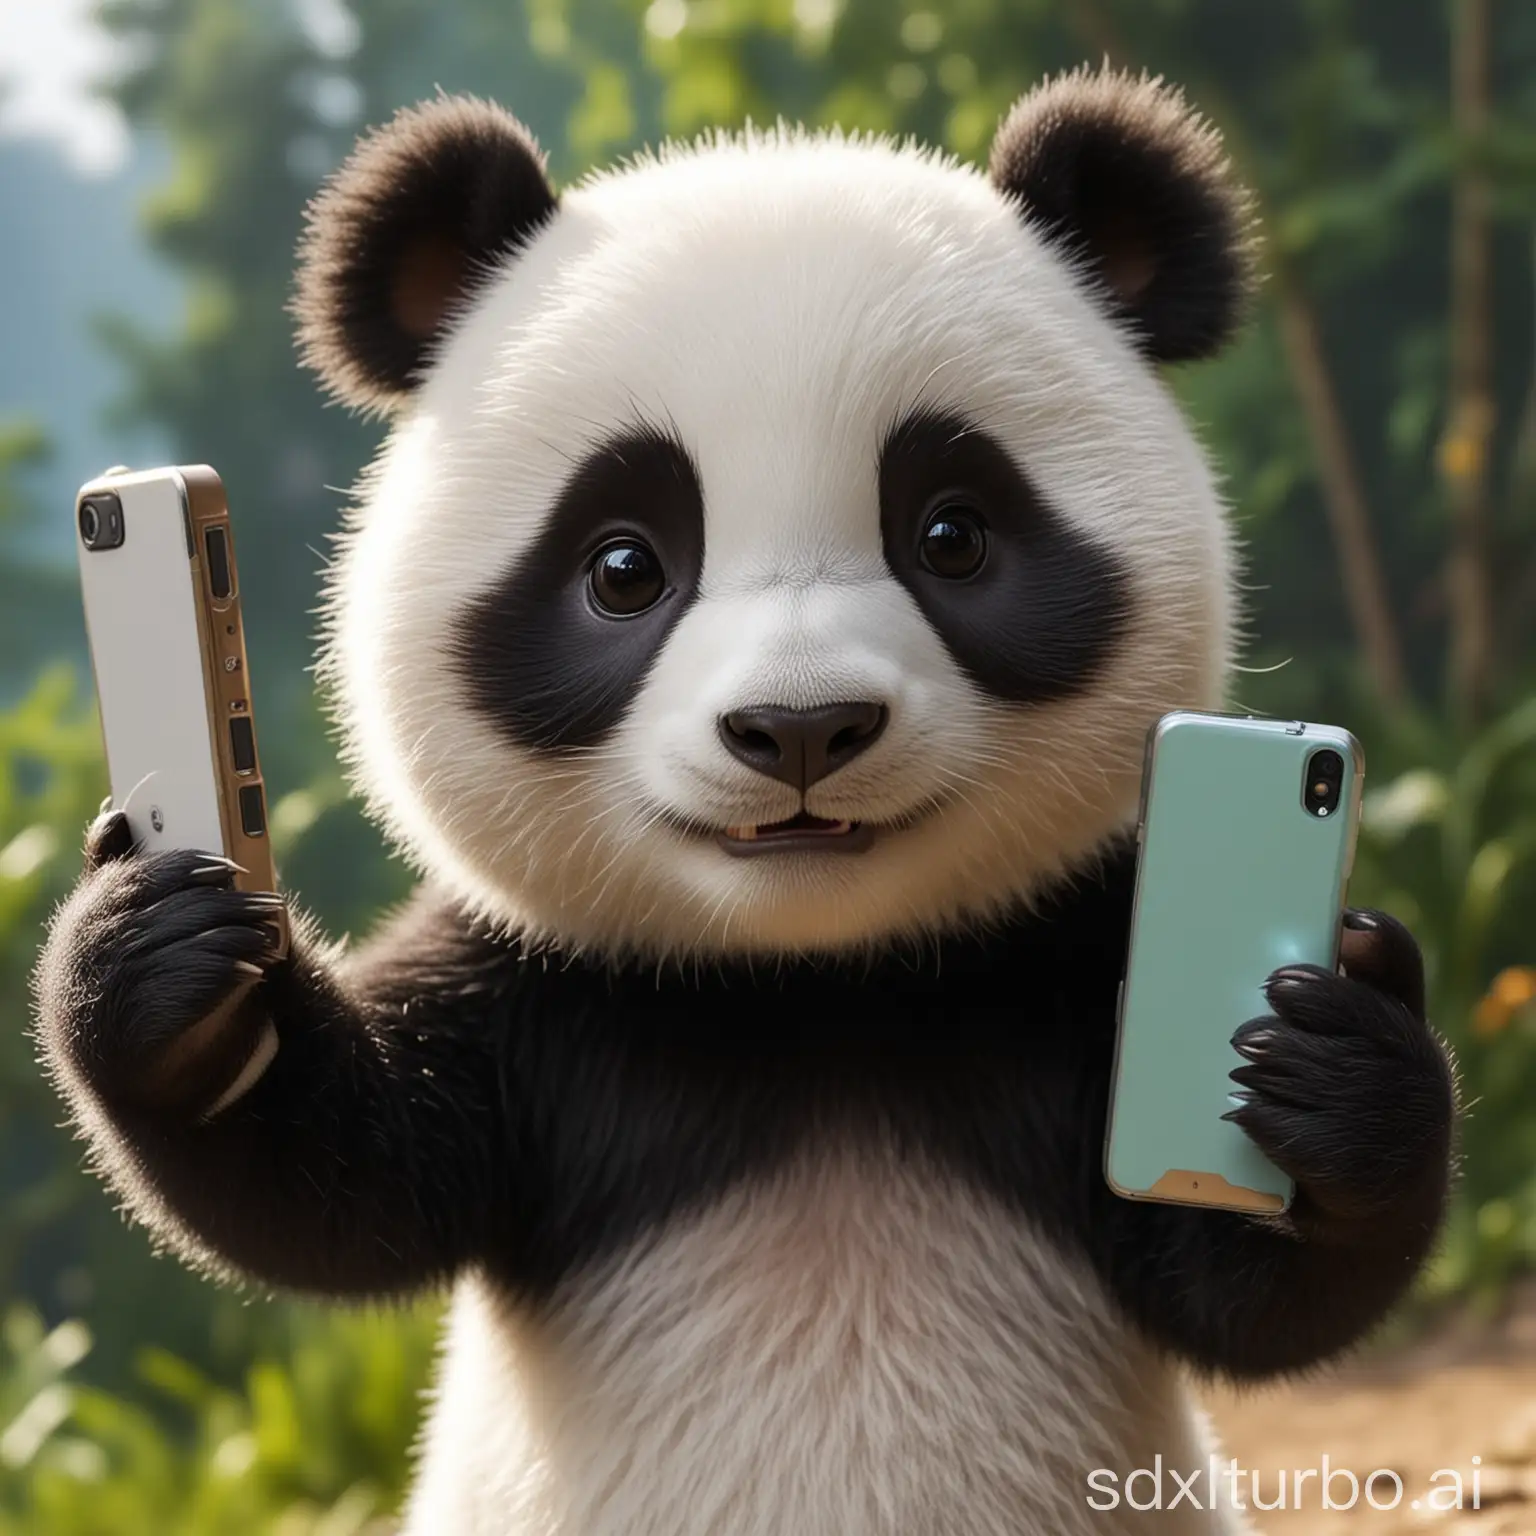 The little panda taking a selfie with a phone